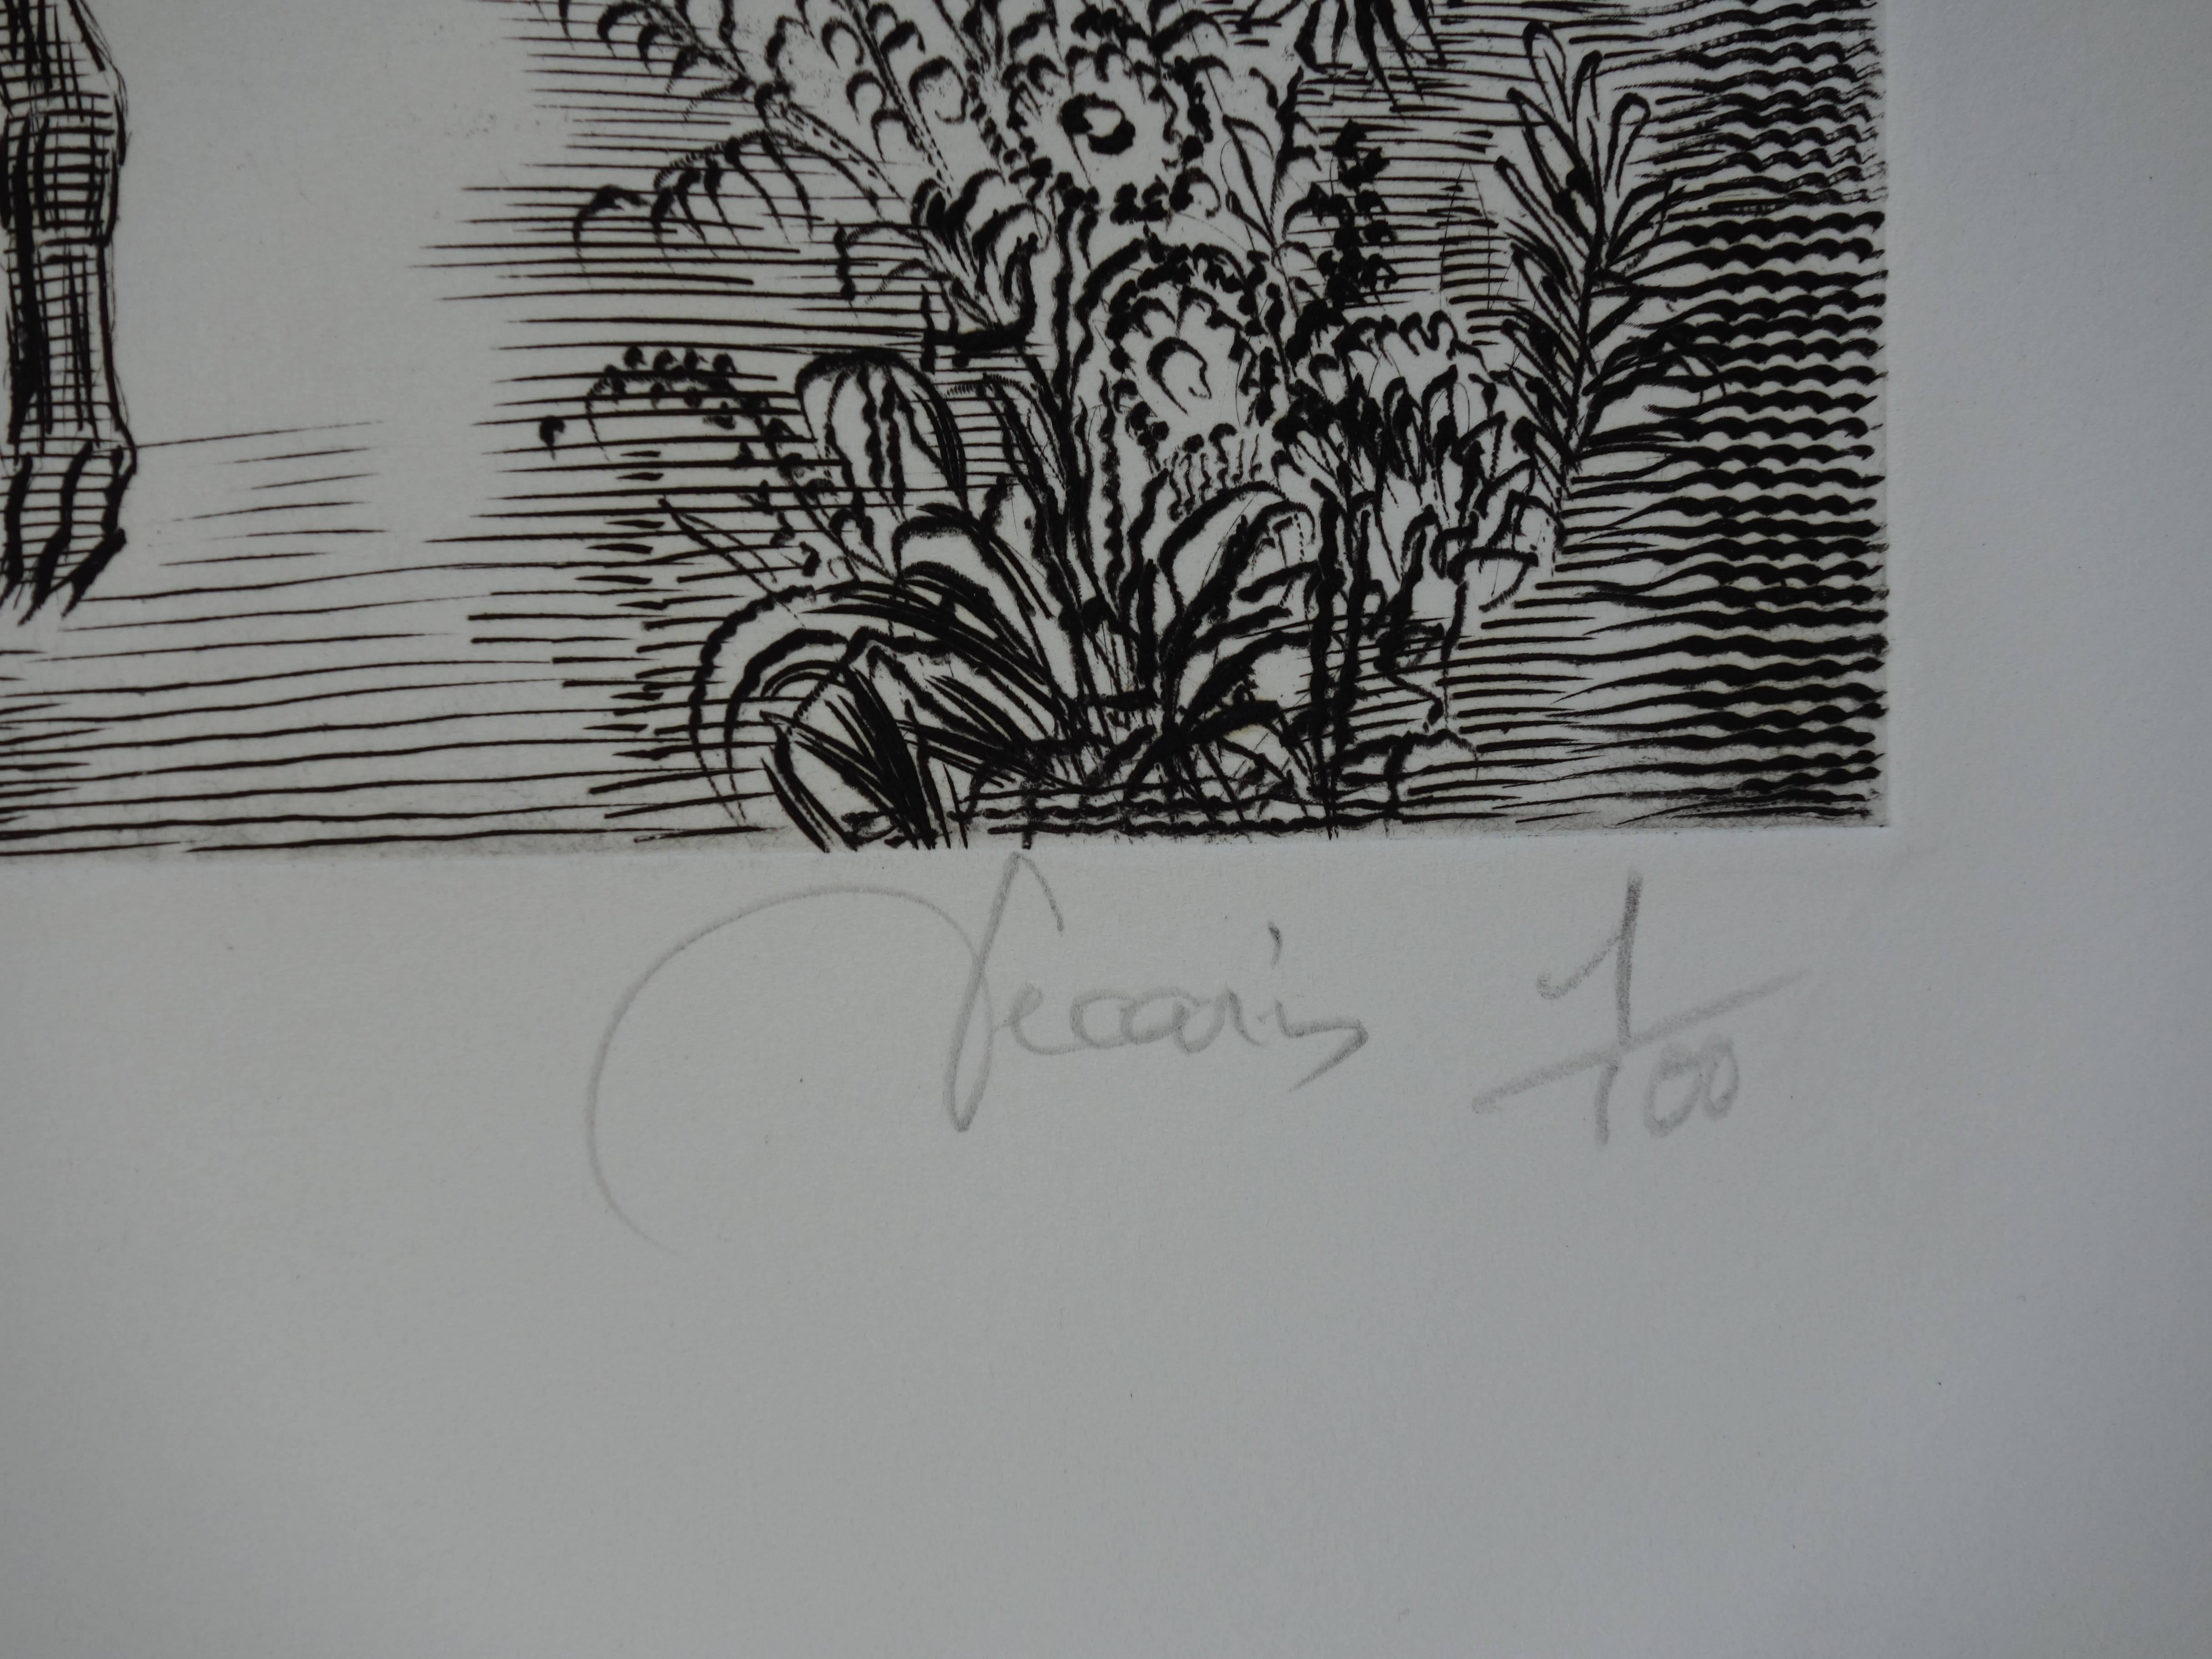 April : Back to the Fields - Original handsigned etching - Exceptional n° 1/100 - Print by Albert Decaris